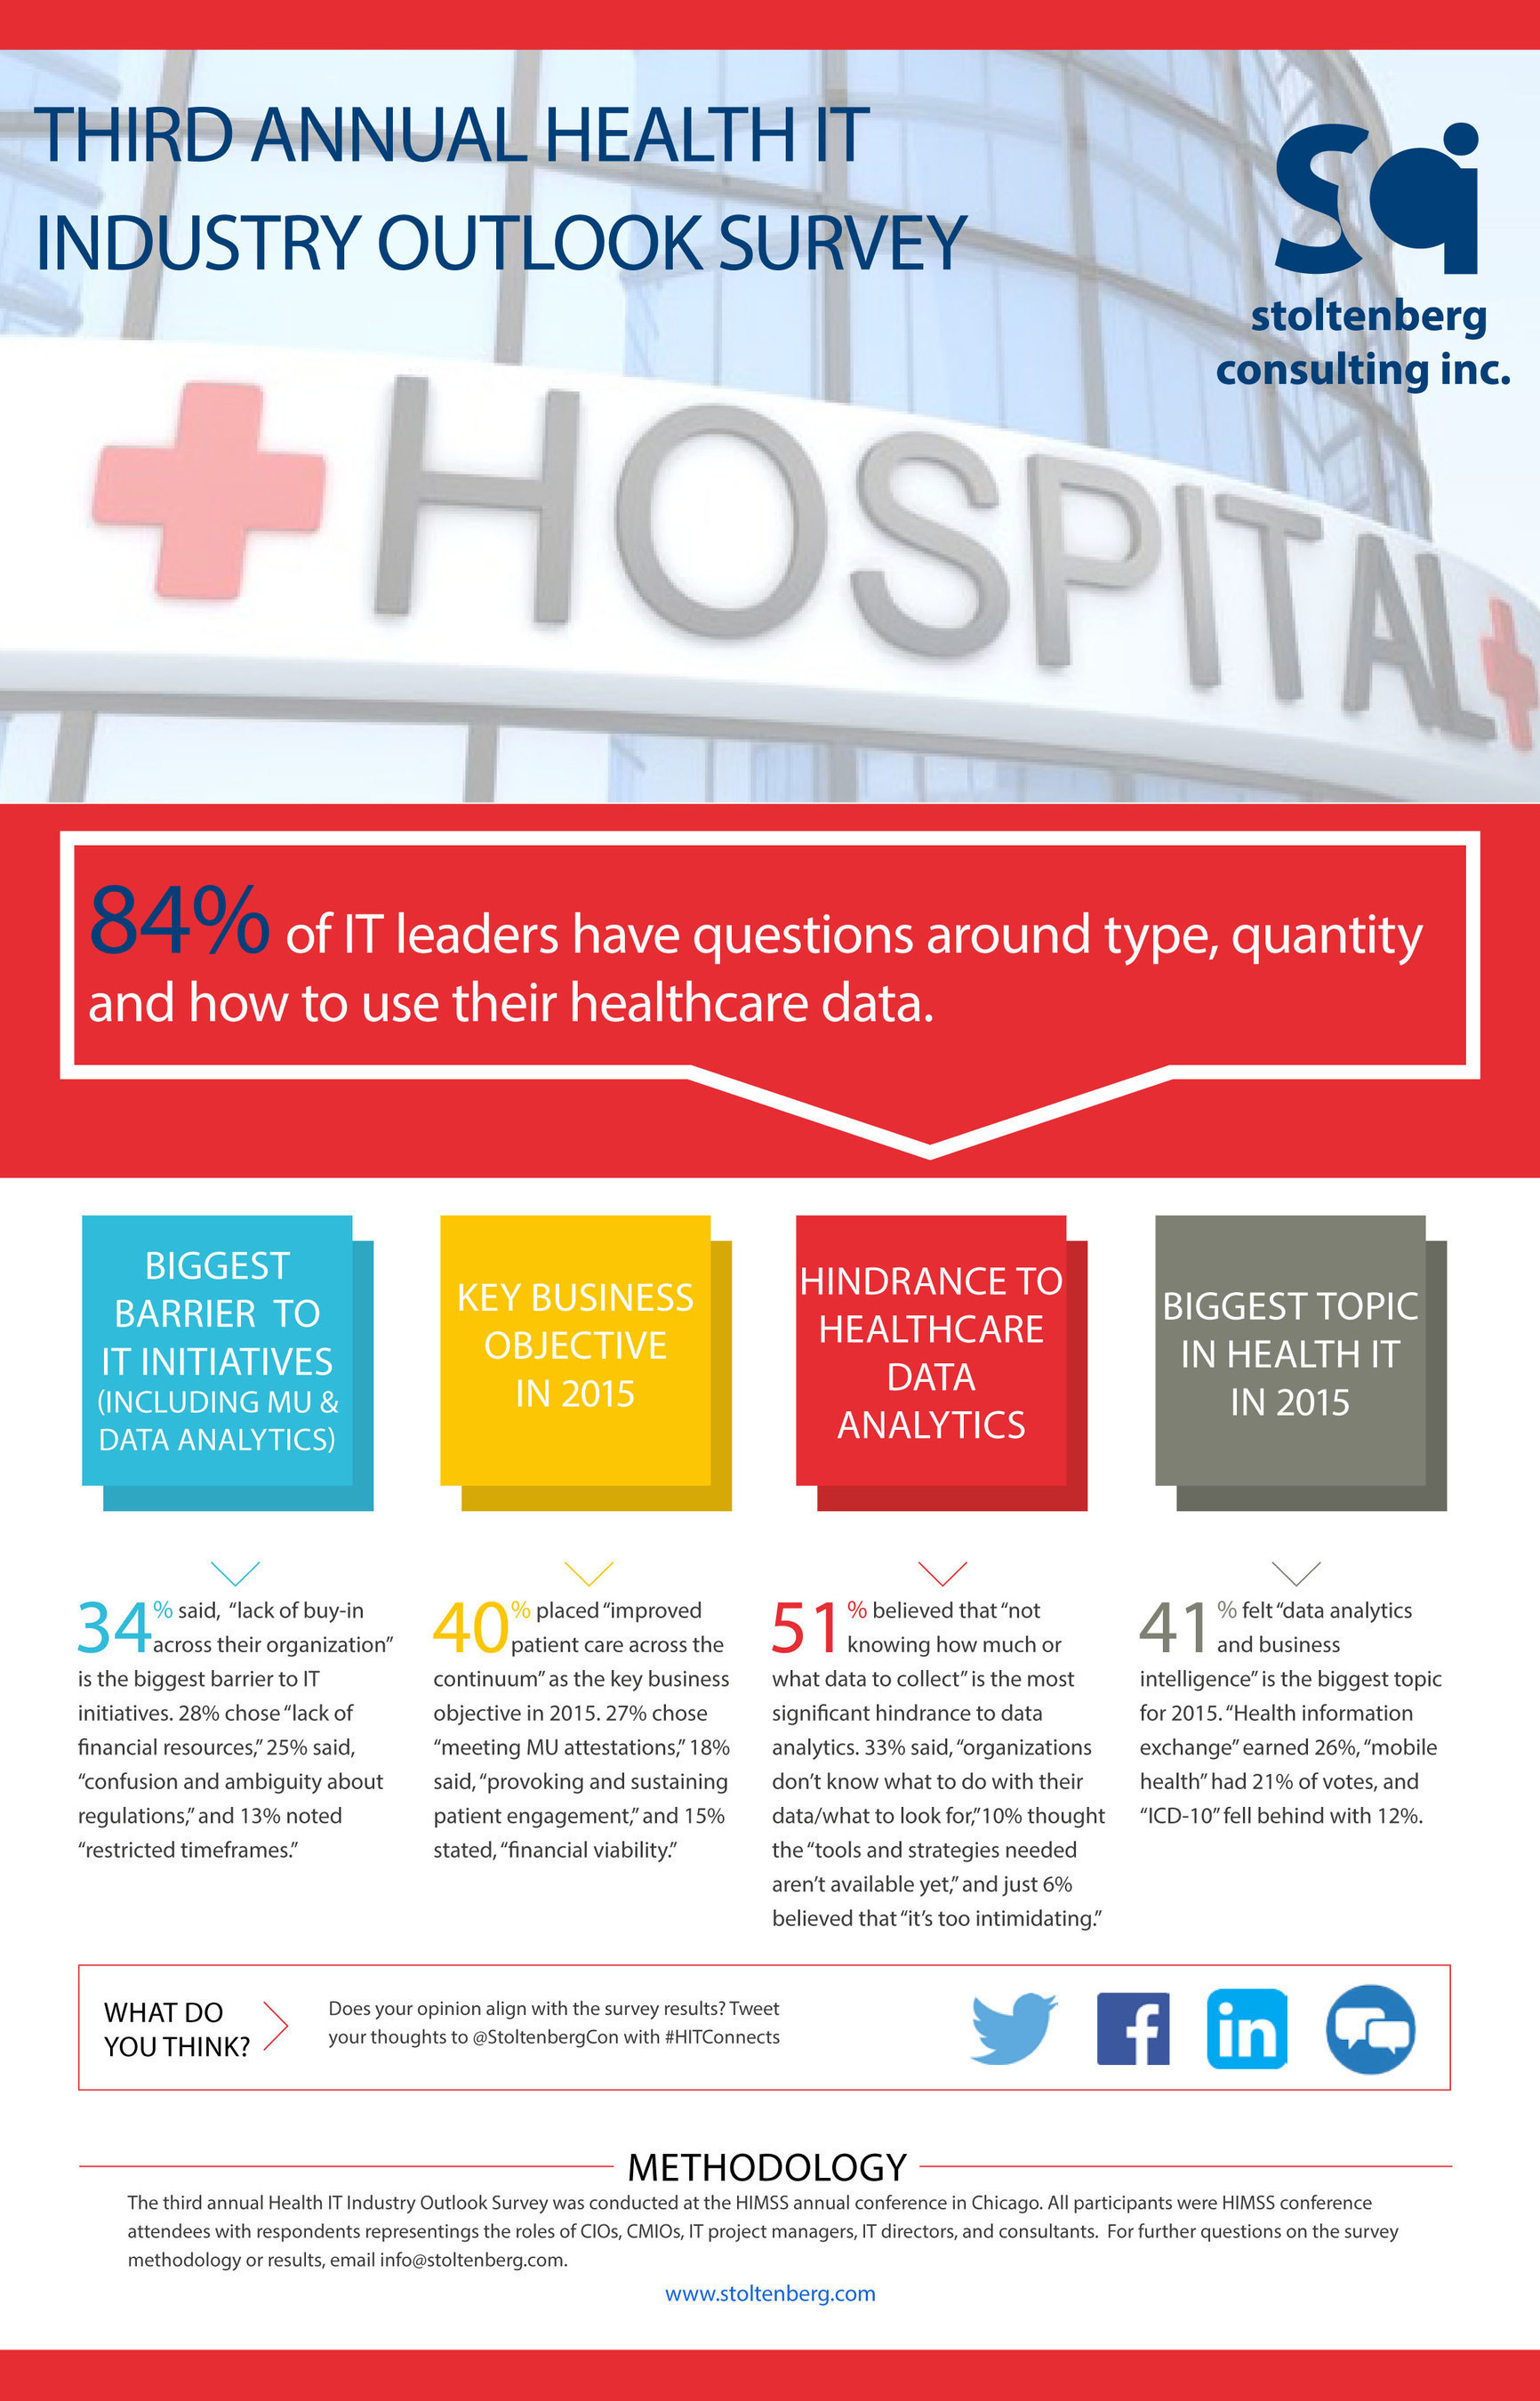 The third annual HIT Industry Outlook Survey revealed health IT leaders have questions around type, quantity and how to use their healthcare data.